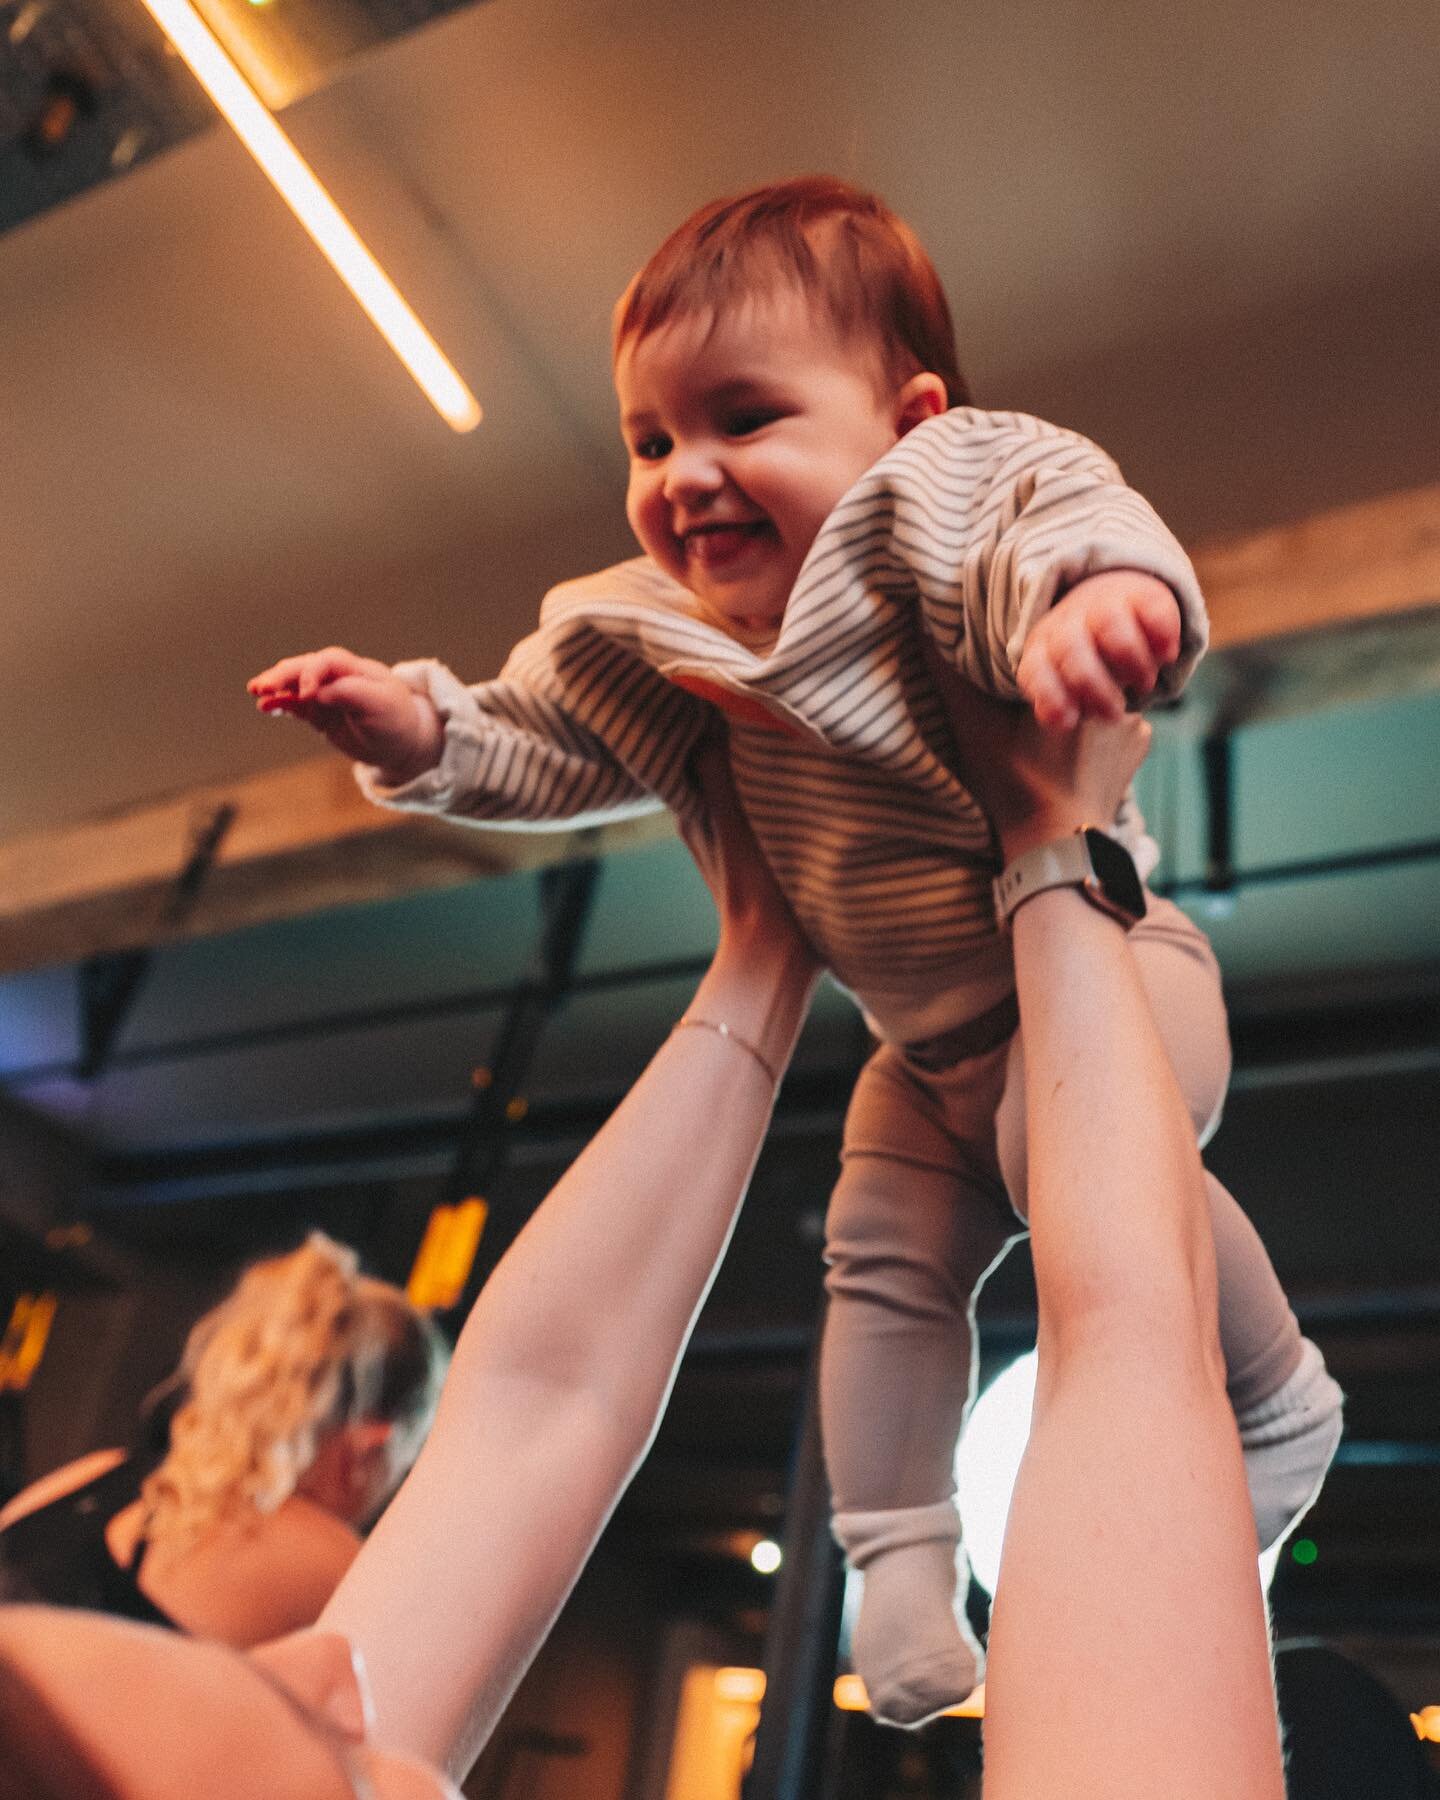 Calling all mums &amp; dads that are struggling to get back in the gym since having baby. SPACE.BABY is for you.

Classes capped at 6 people every Monday and Friday at 11am. 

Our coaches will help you and the little ones so you can get a proper work